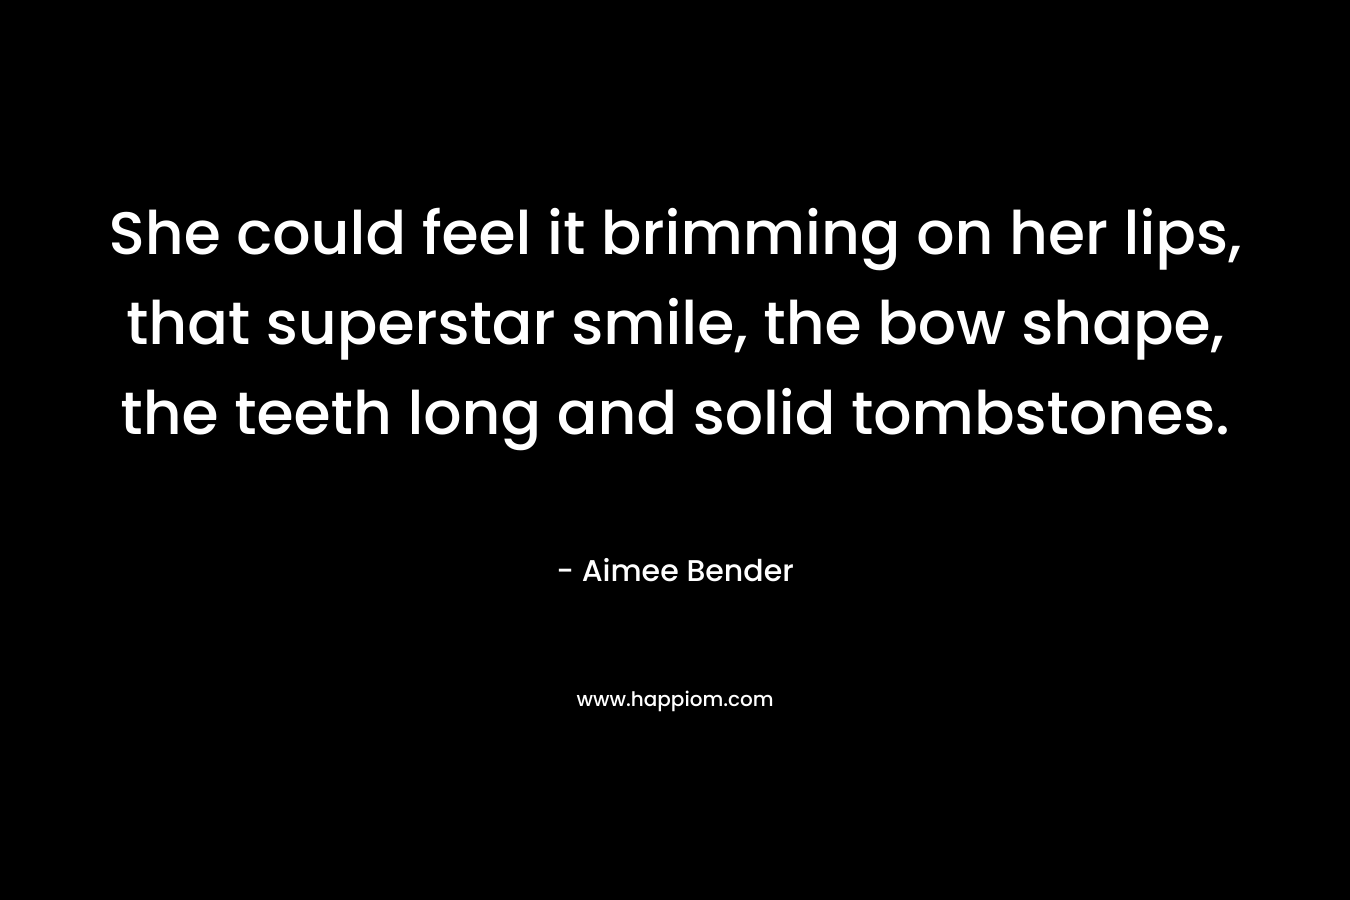 She could feel it brimming on her lips, that superstar smile, the bow shape, the teeth long and solid tombstones. – Aimee Bender